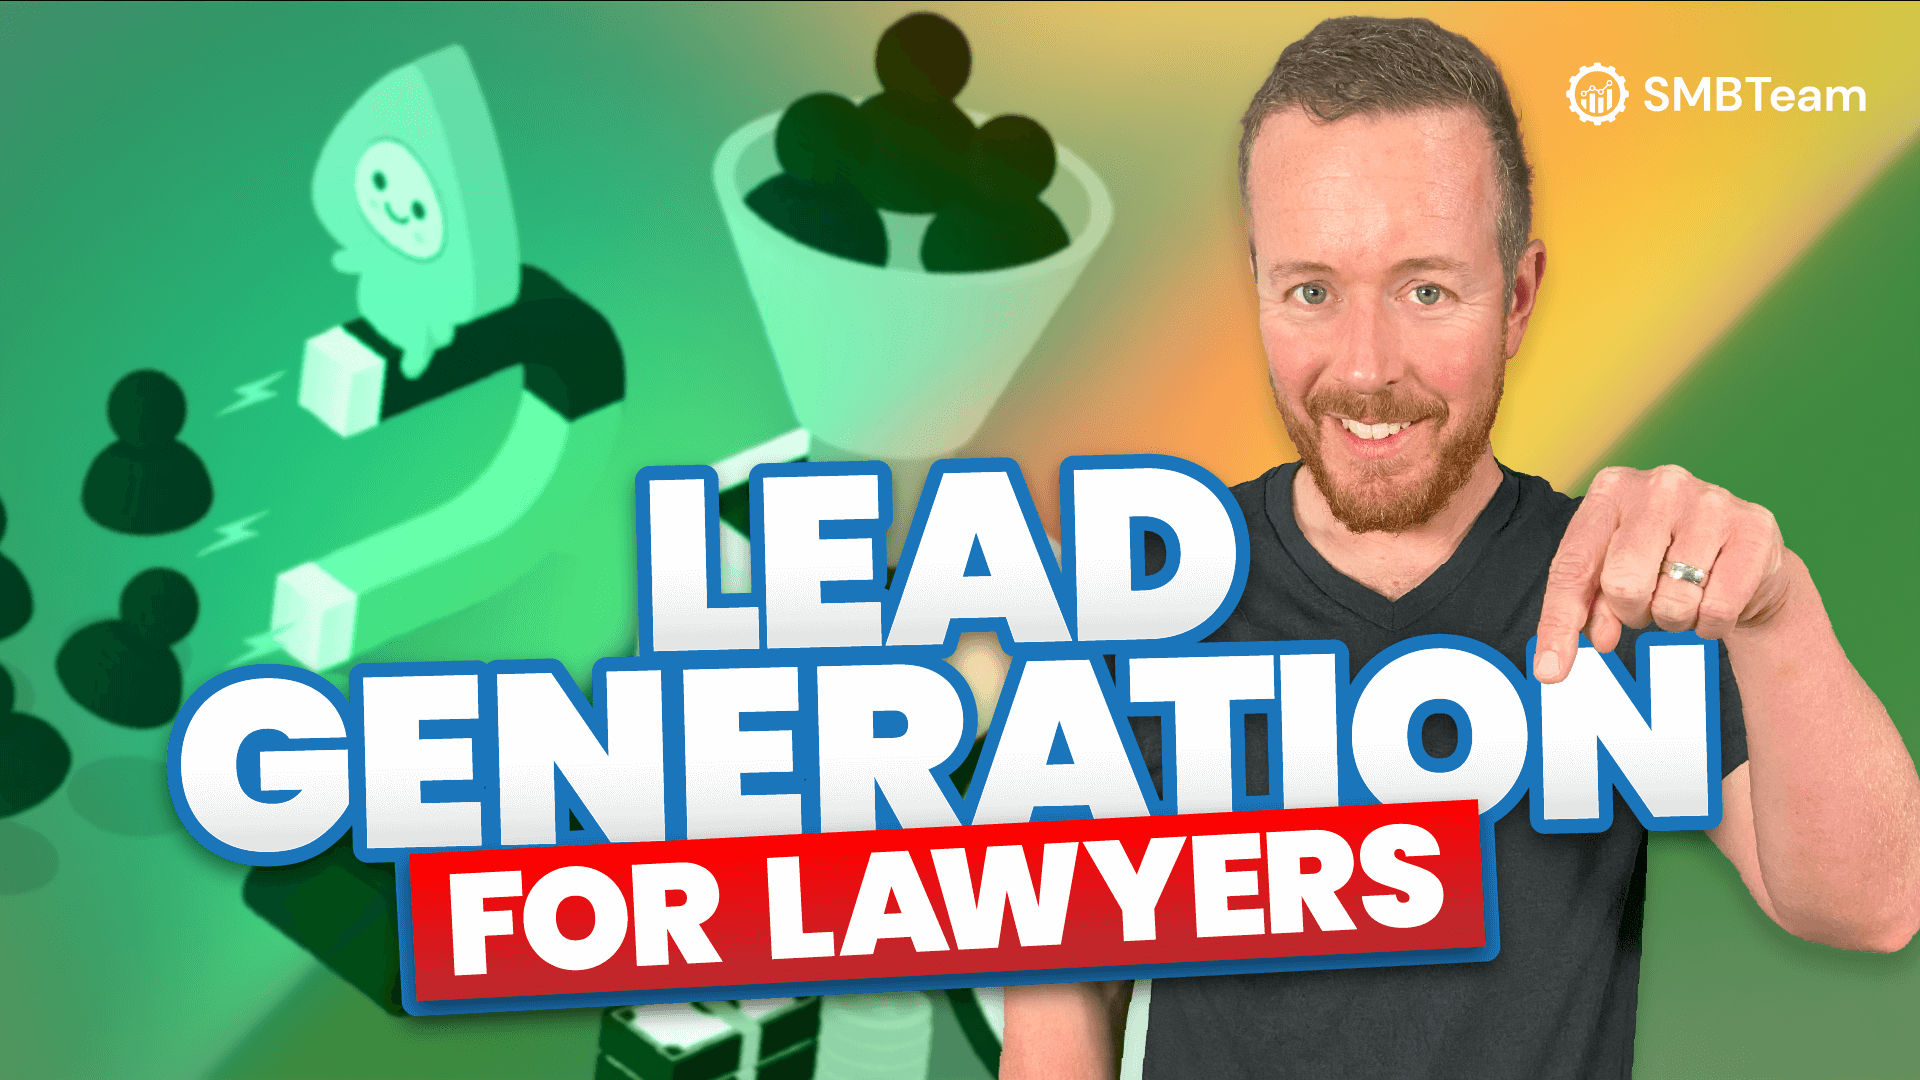 Lead Generation for Lawyers: How To Get More Law Firm Leads & Beat The Biggest Spenders In Any Market